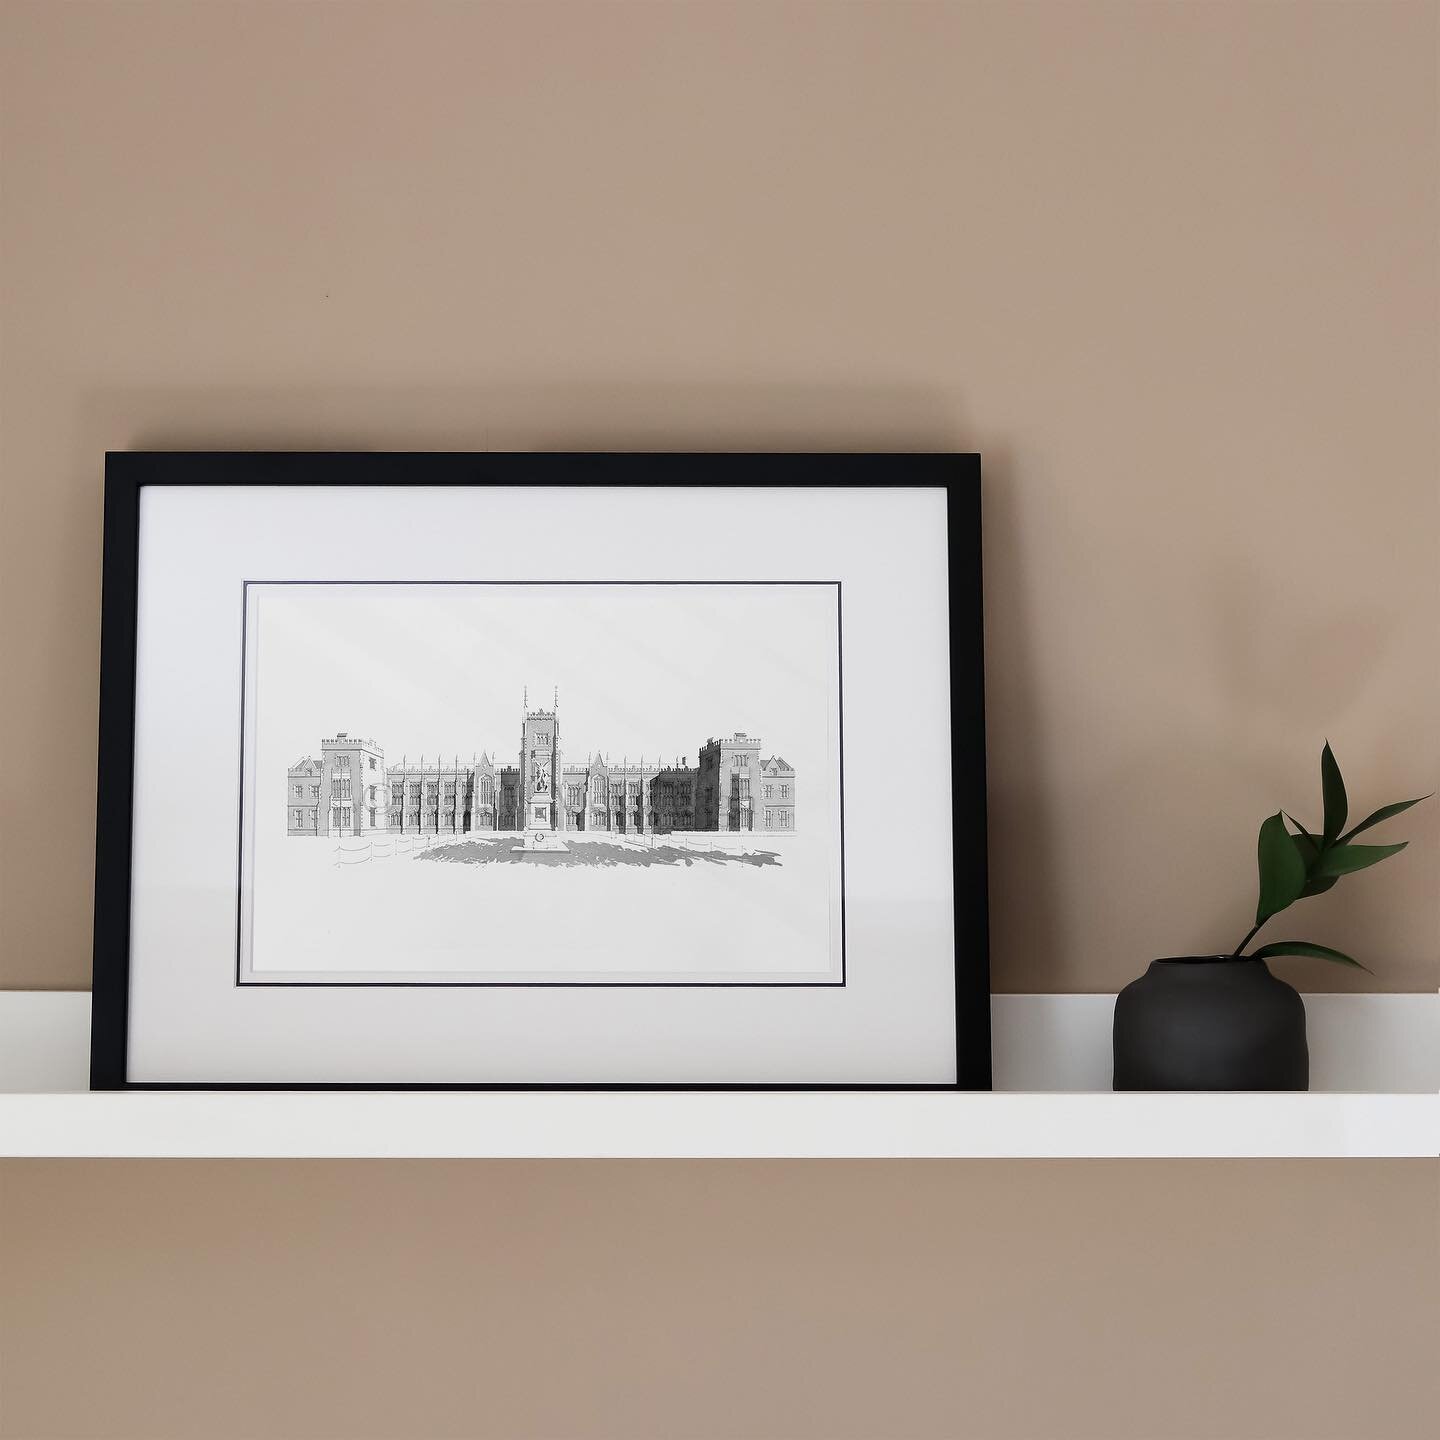 *** Pre-order now for 10% off and free UK delivery! ***

Queen&rsquo;s University Belfast. What. A. Building. 

And it&rsquo;s finally on the website!

This would make such a lovely gift for a student who hasn&rsquo;t been able to enjoy normal studen